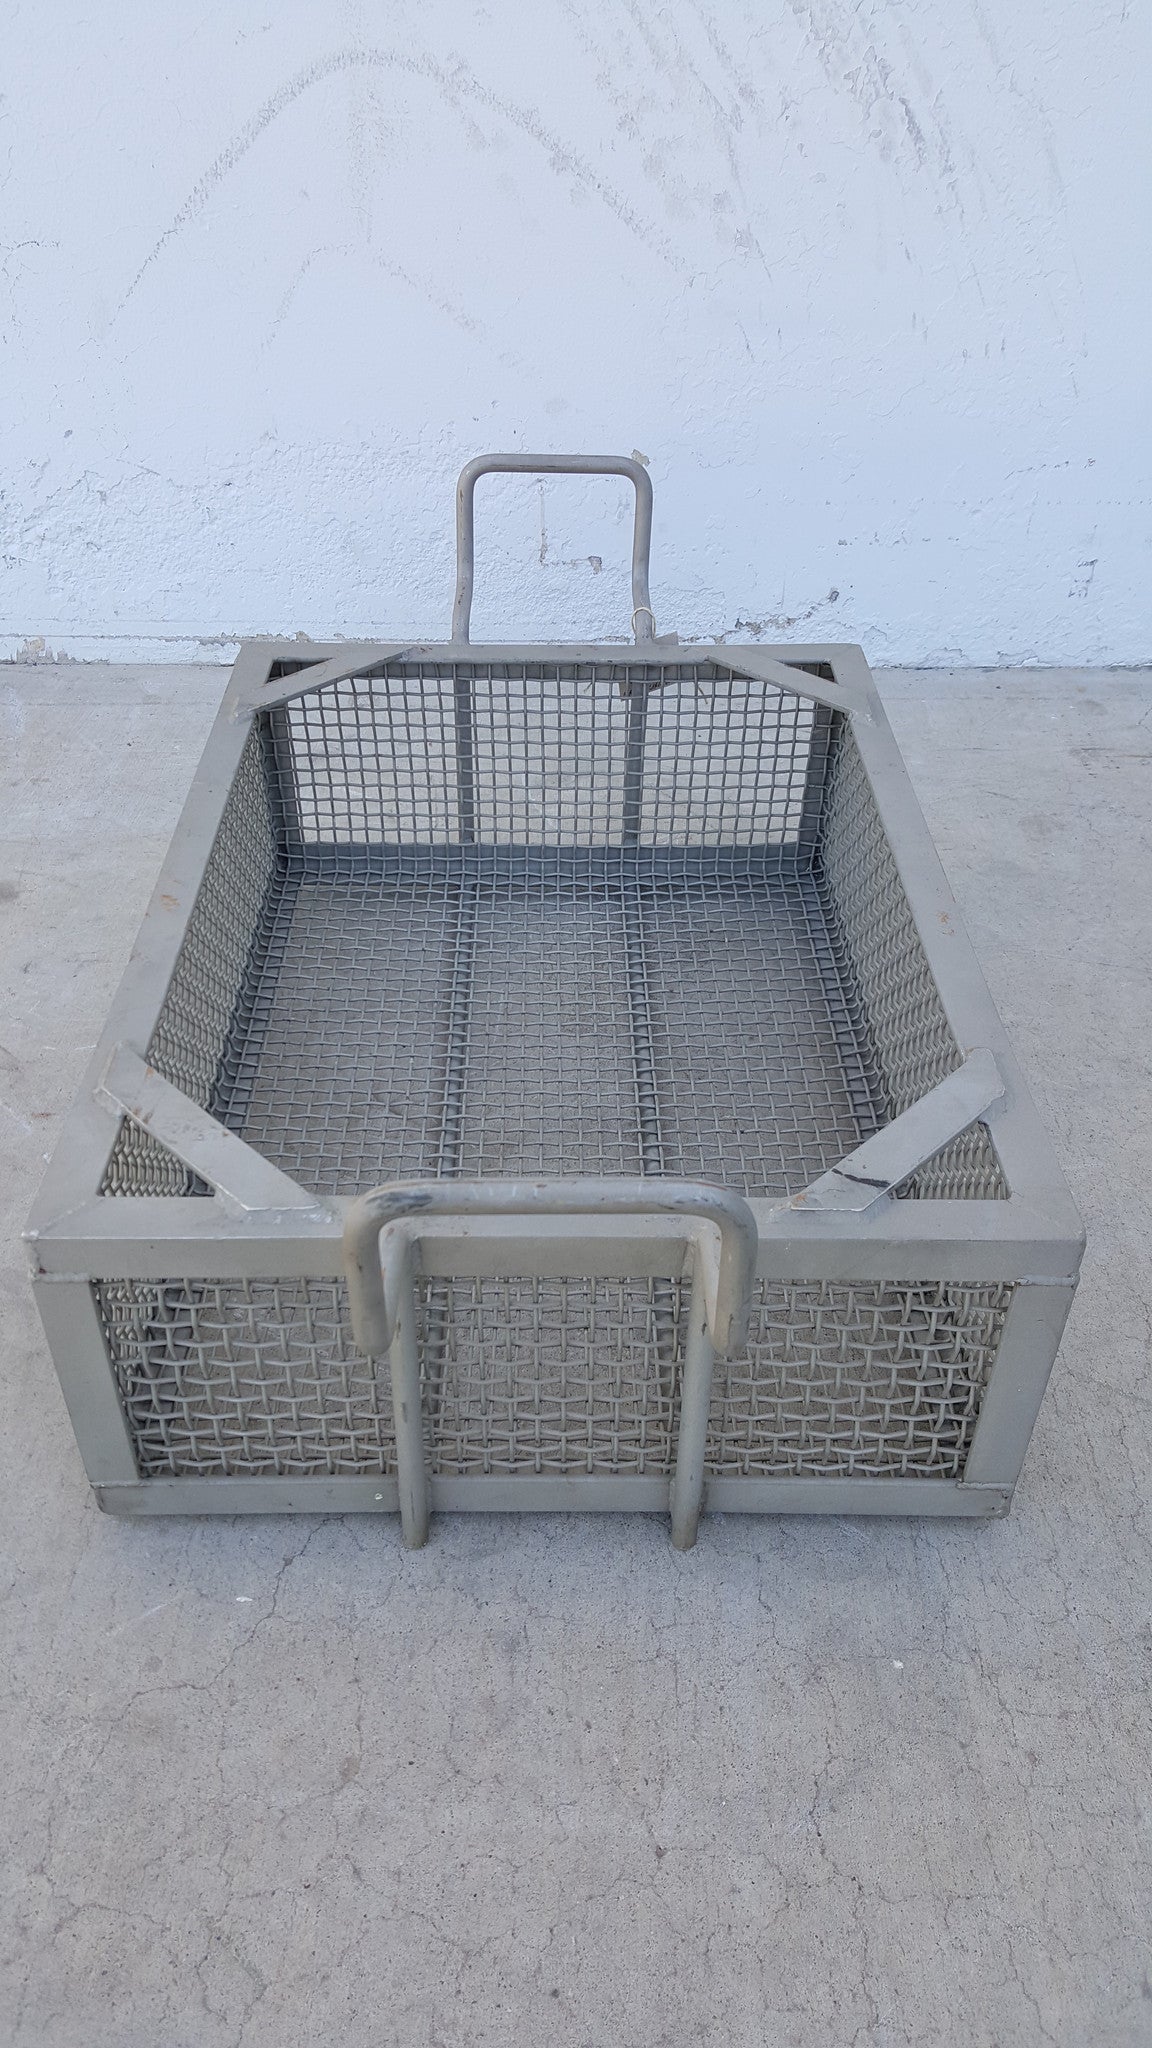 Airplane cargo basket, square, metal, with non-movable handles